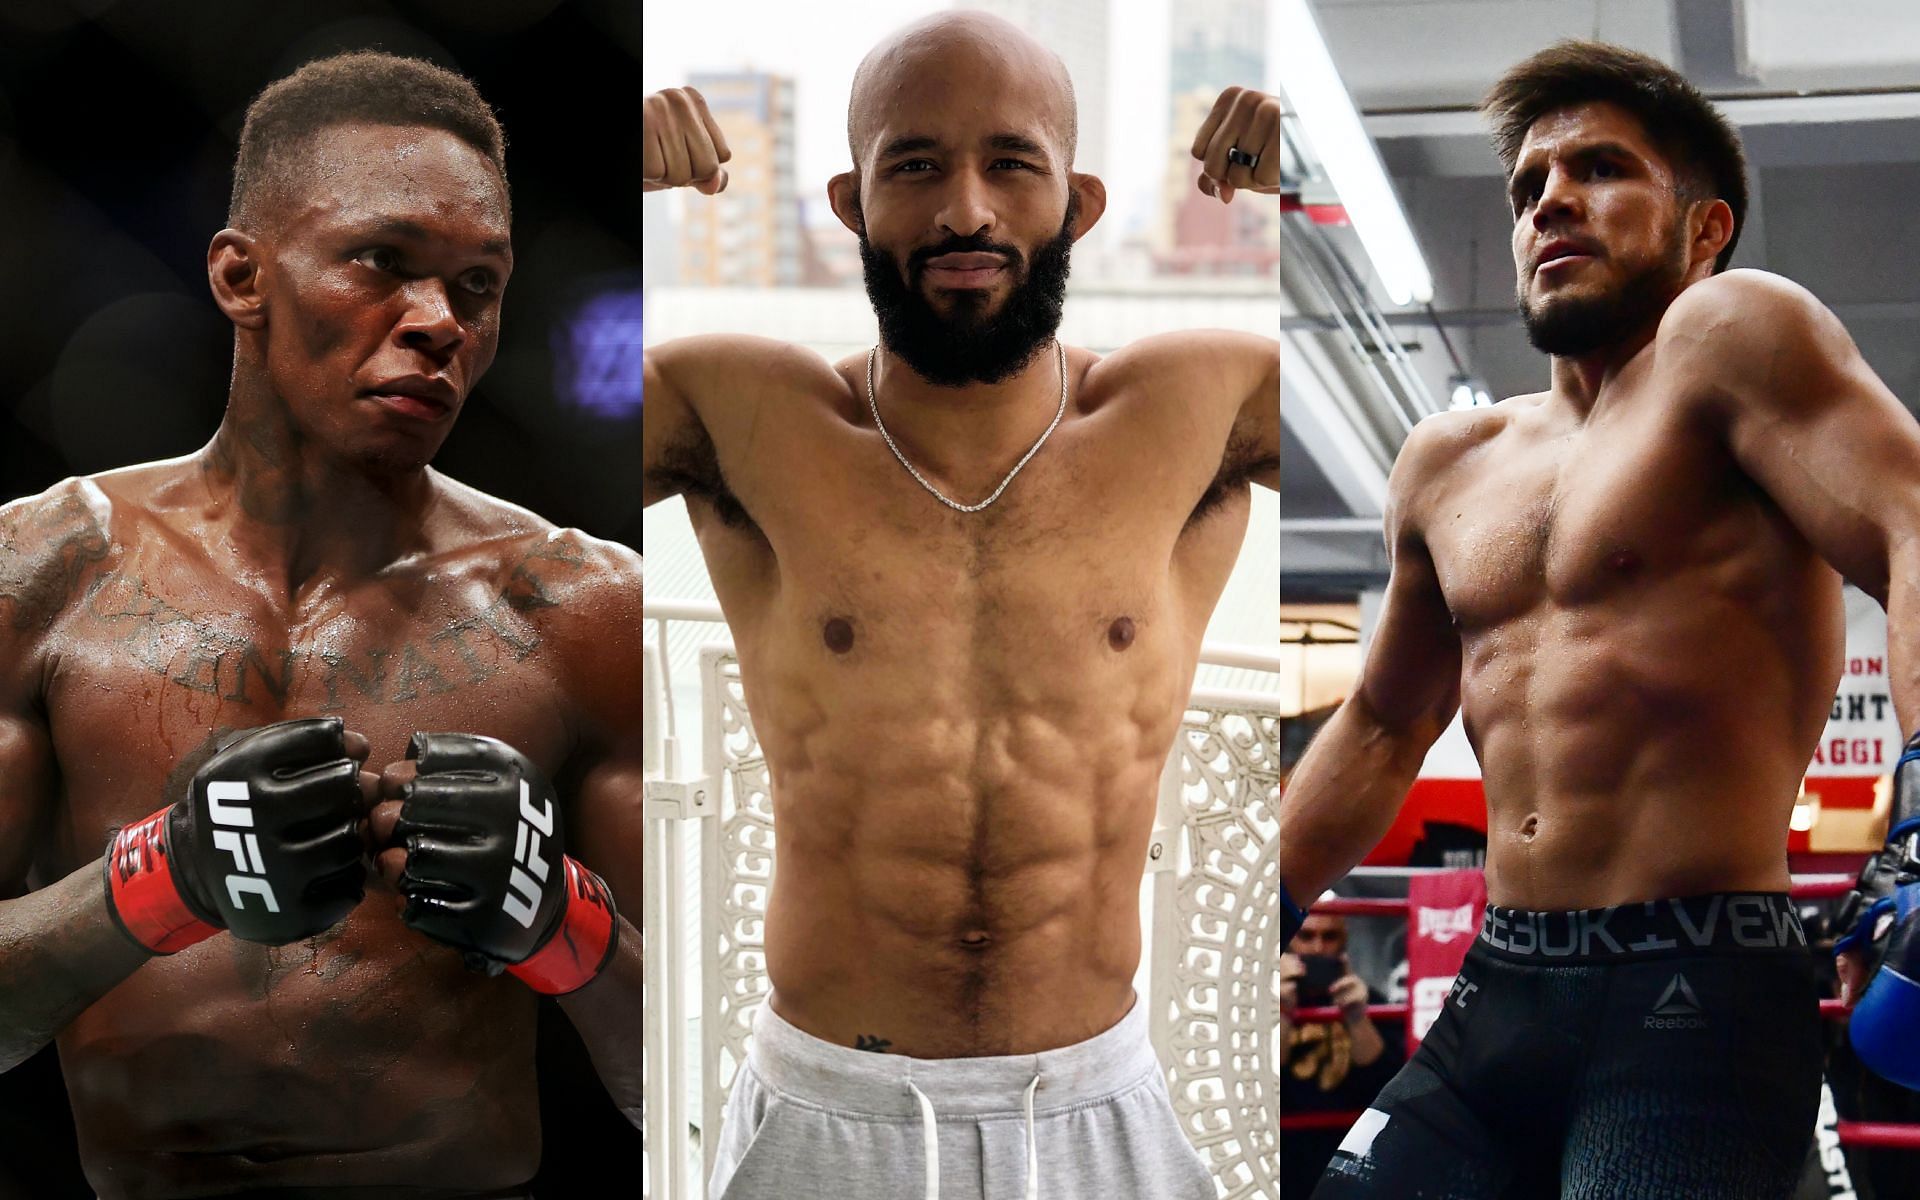 From the left- Israel Adesanya, Demetrious Johnson and Henry Cejudo [Image credits: Getty Images and @MightyMouse on Twitter]